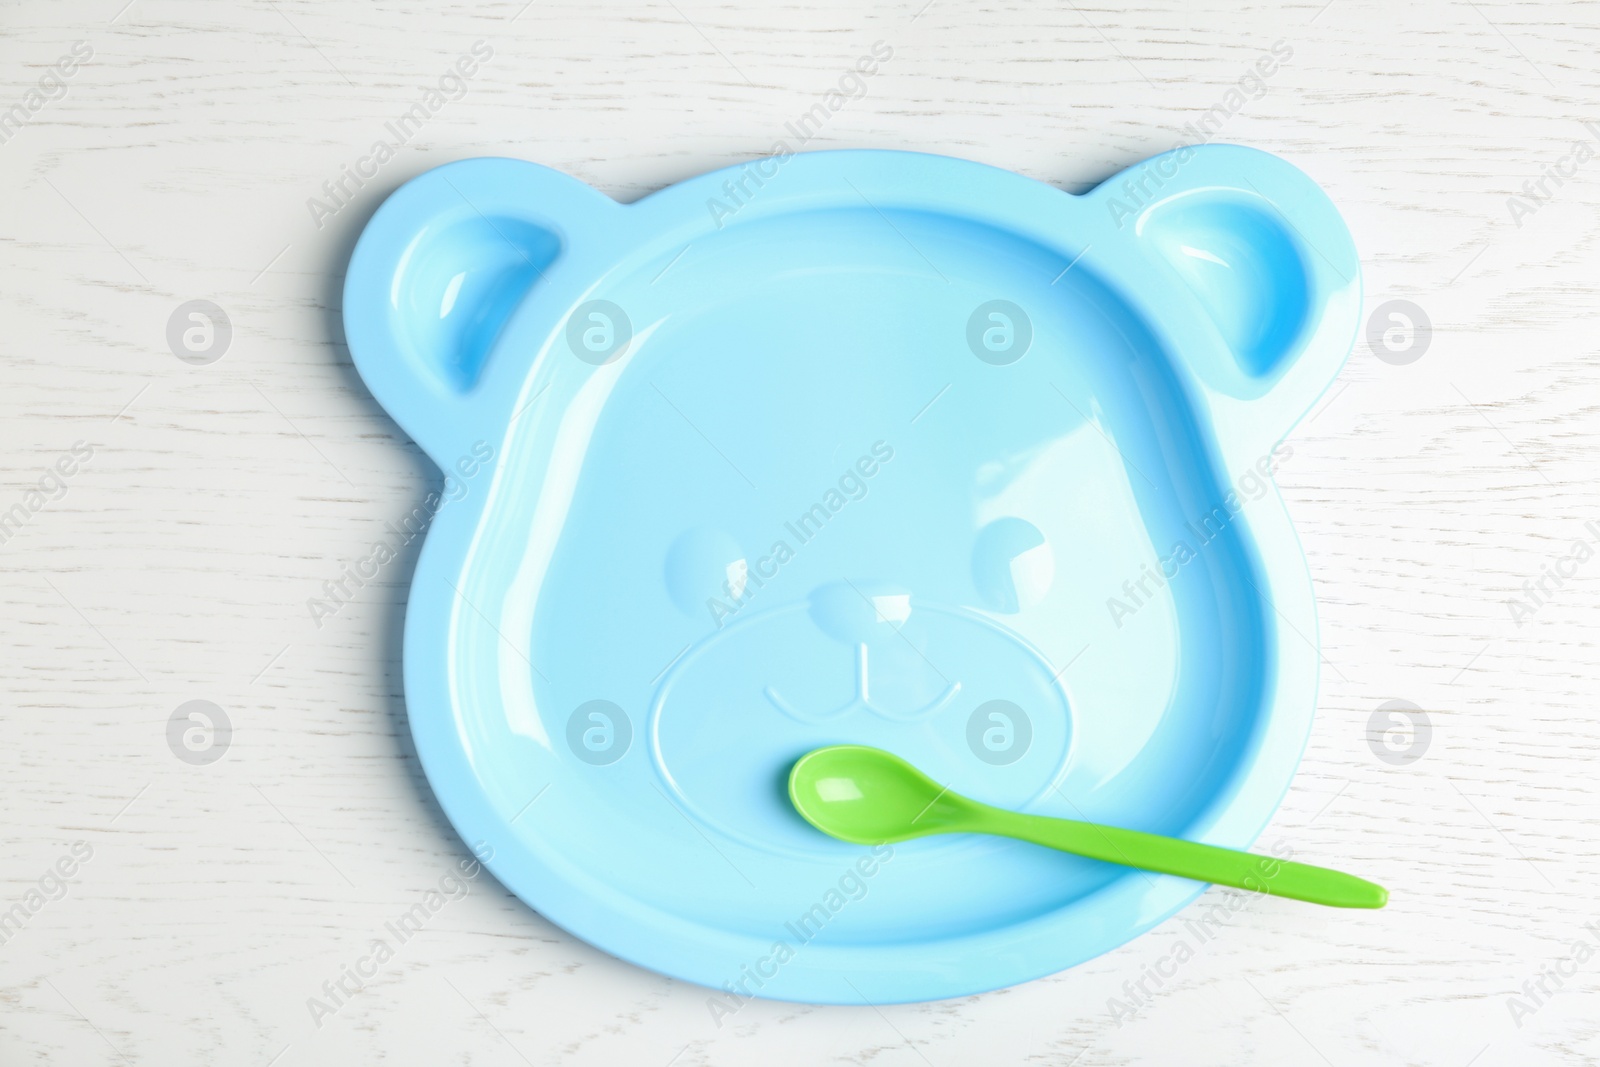 Photo of Cute animal shaped plate and spoon on white wooden table, top view. Serving baby food